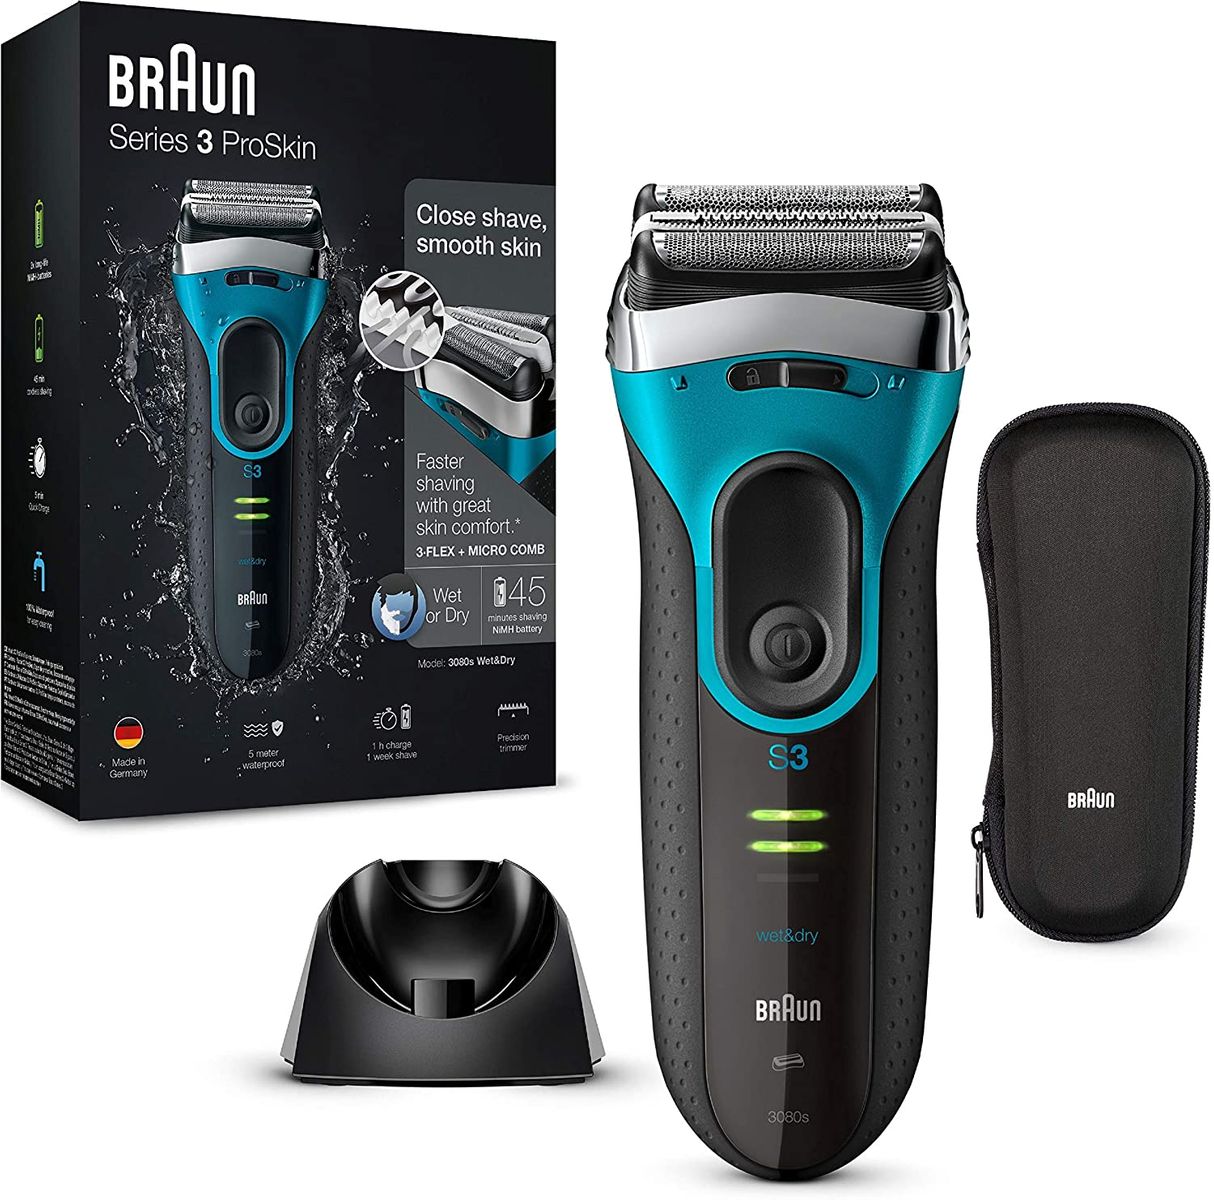 Braun Series 3 ProSkin 3080s Mens Electric Beard Shaver, Rechargeable Electric Shaver + Refill Base, Black / Blue Braun Series 3 ProSkin 3080 Solo Shaver